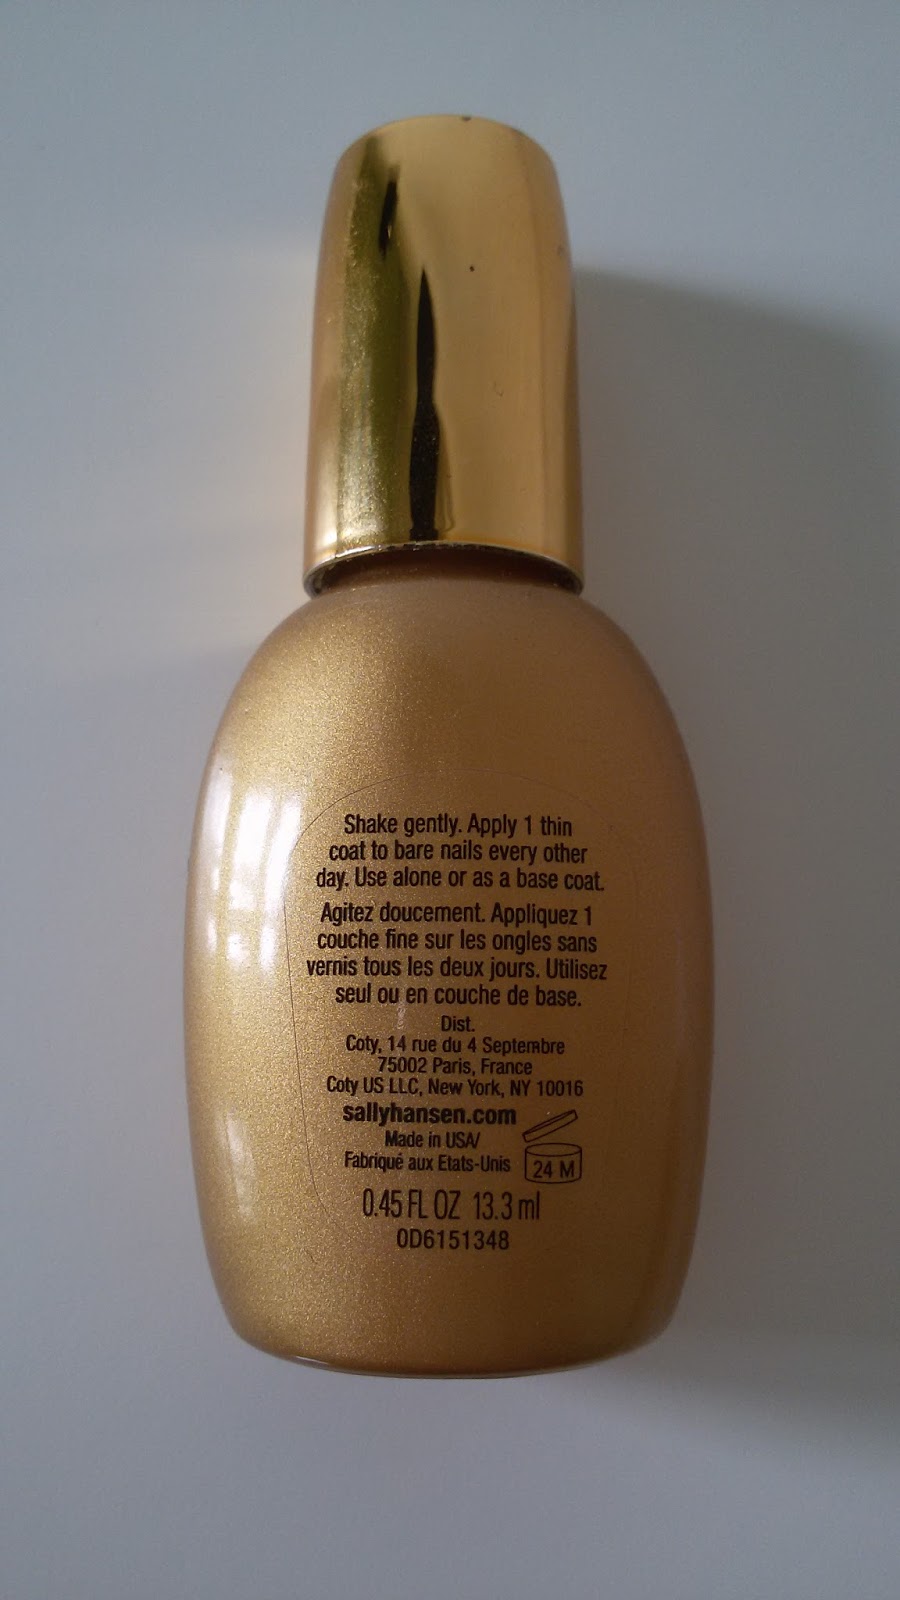 M View Sally Hansen Nailgrowth Miracle Recenze Review